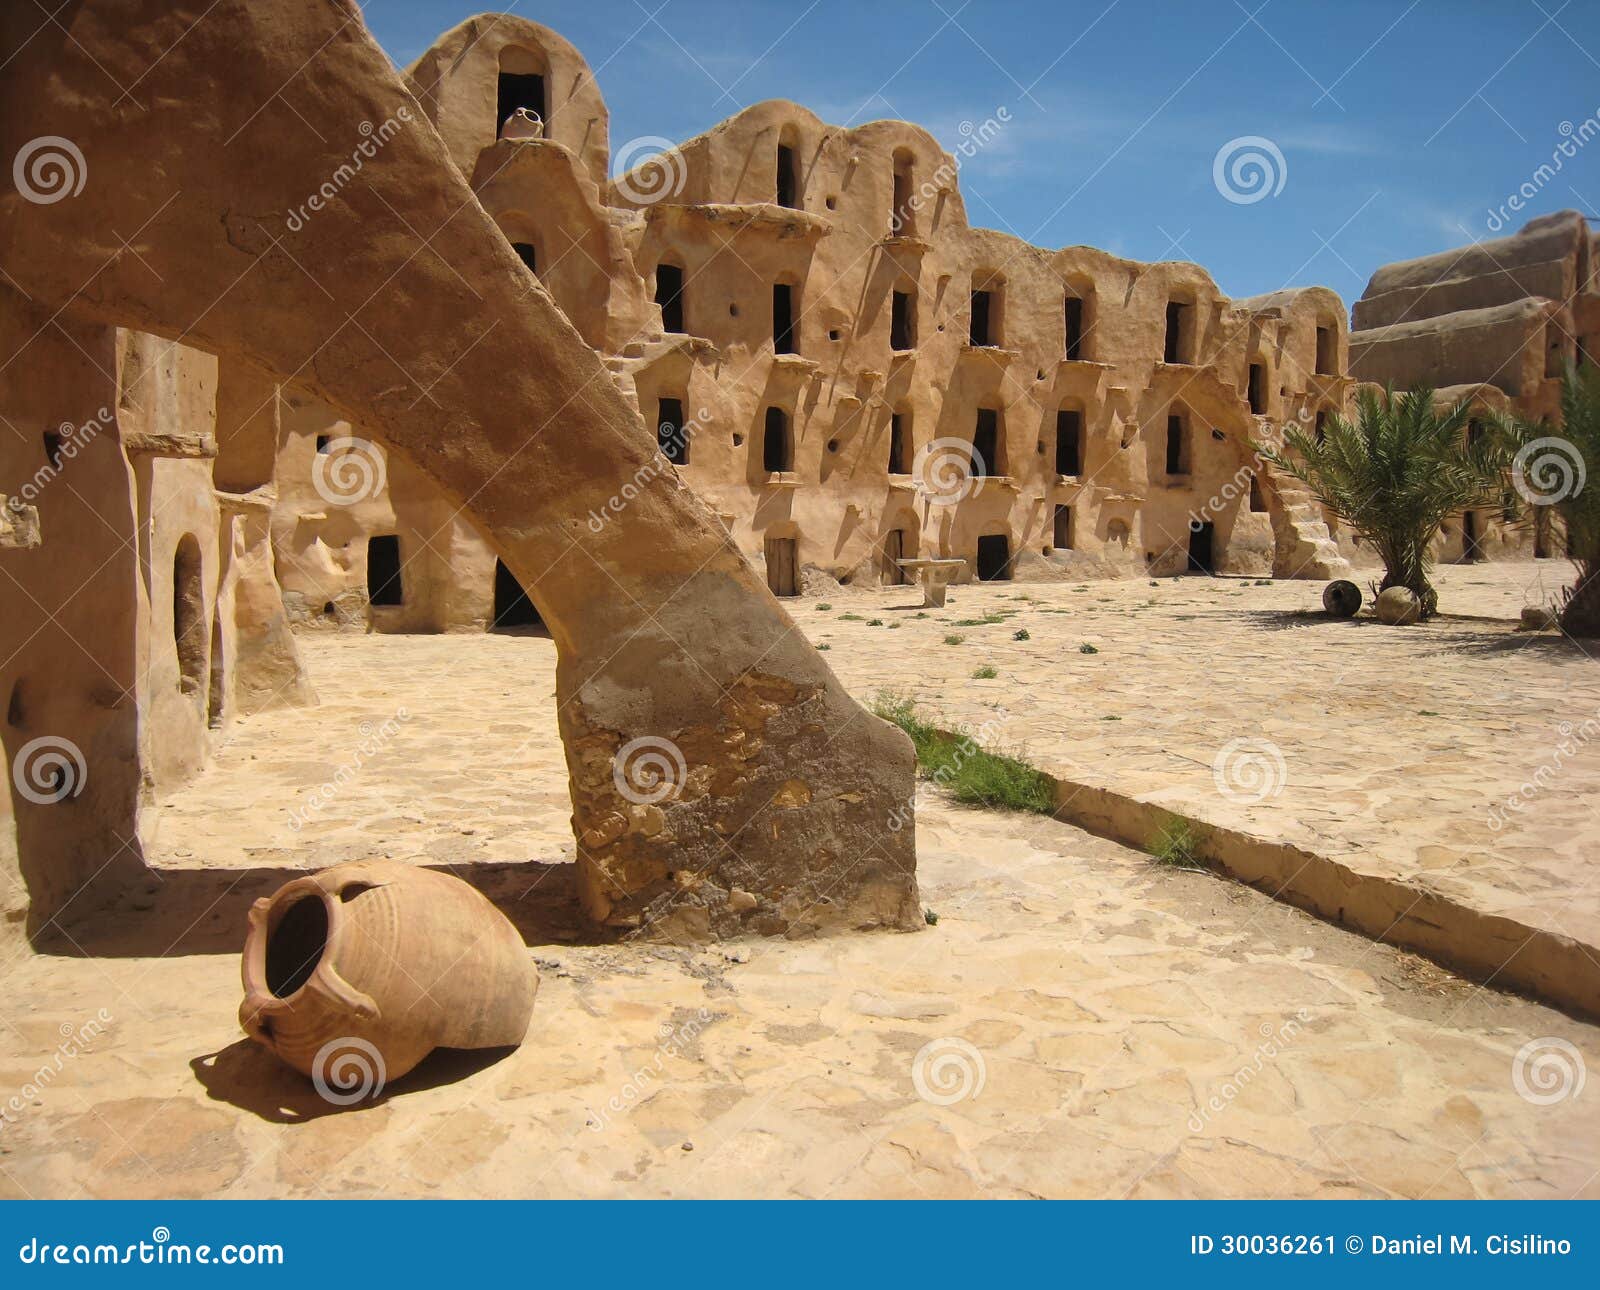 berber fortified granary. ksar ouled soltane. tunisia